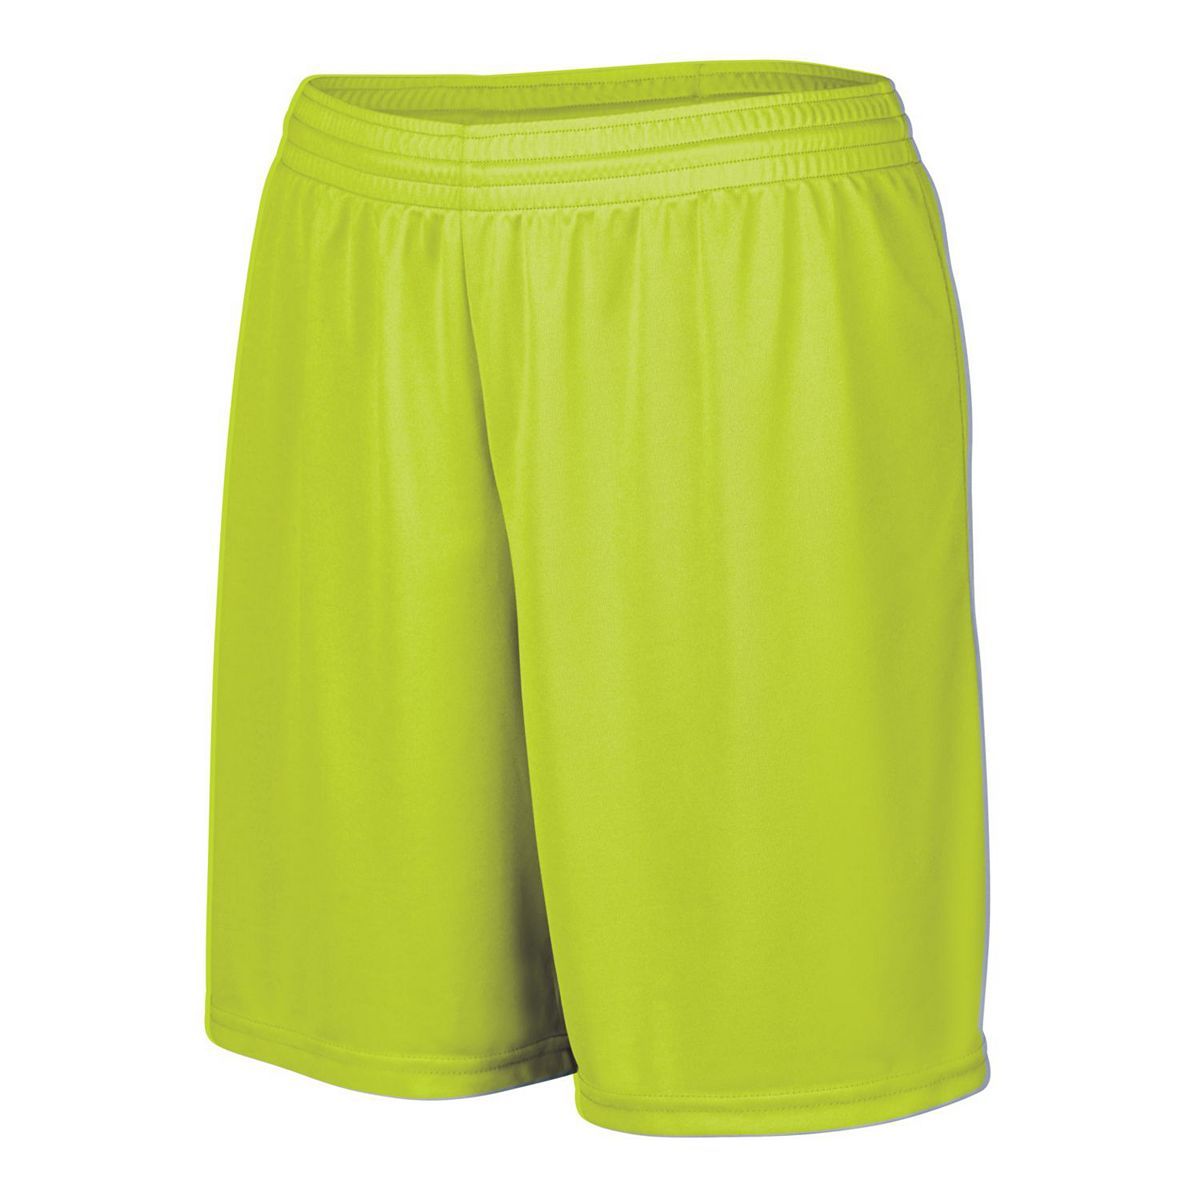 Augusta Sportswear Girls Octane Shorts in Lime  -Part of the Girls, Augusta-Products, Girls-Shorts product lines at KanaleyCreations.com